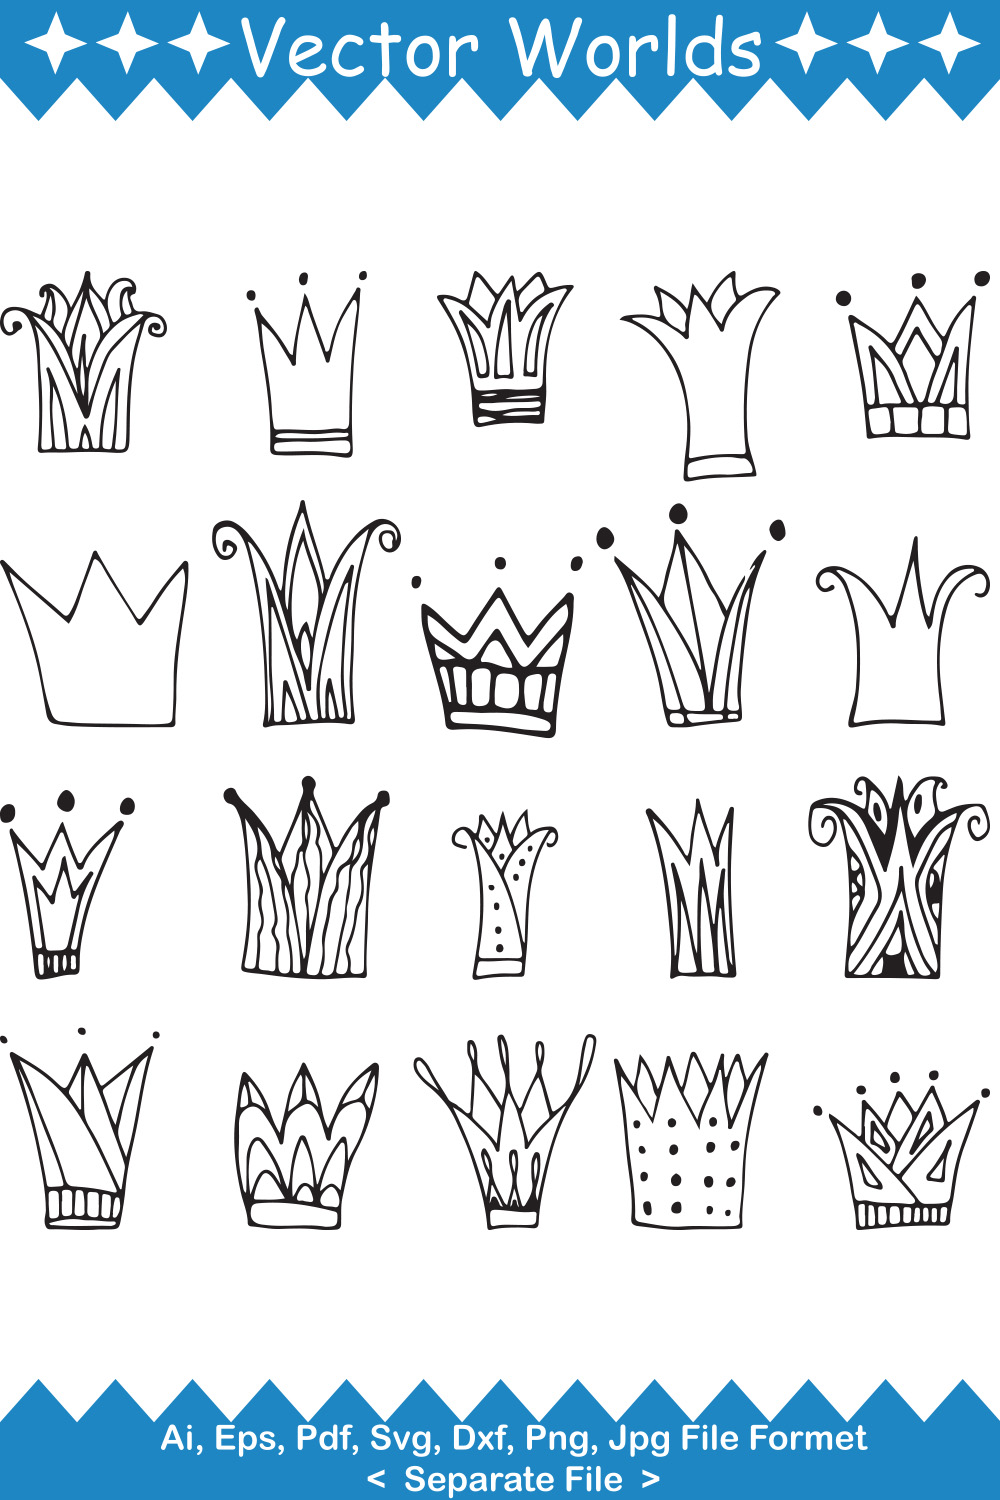 Pack of vector enchanting images of silhouettes of crowns.